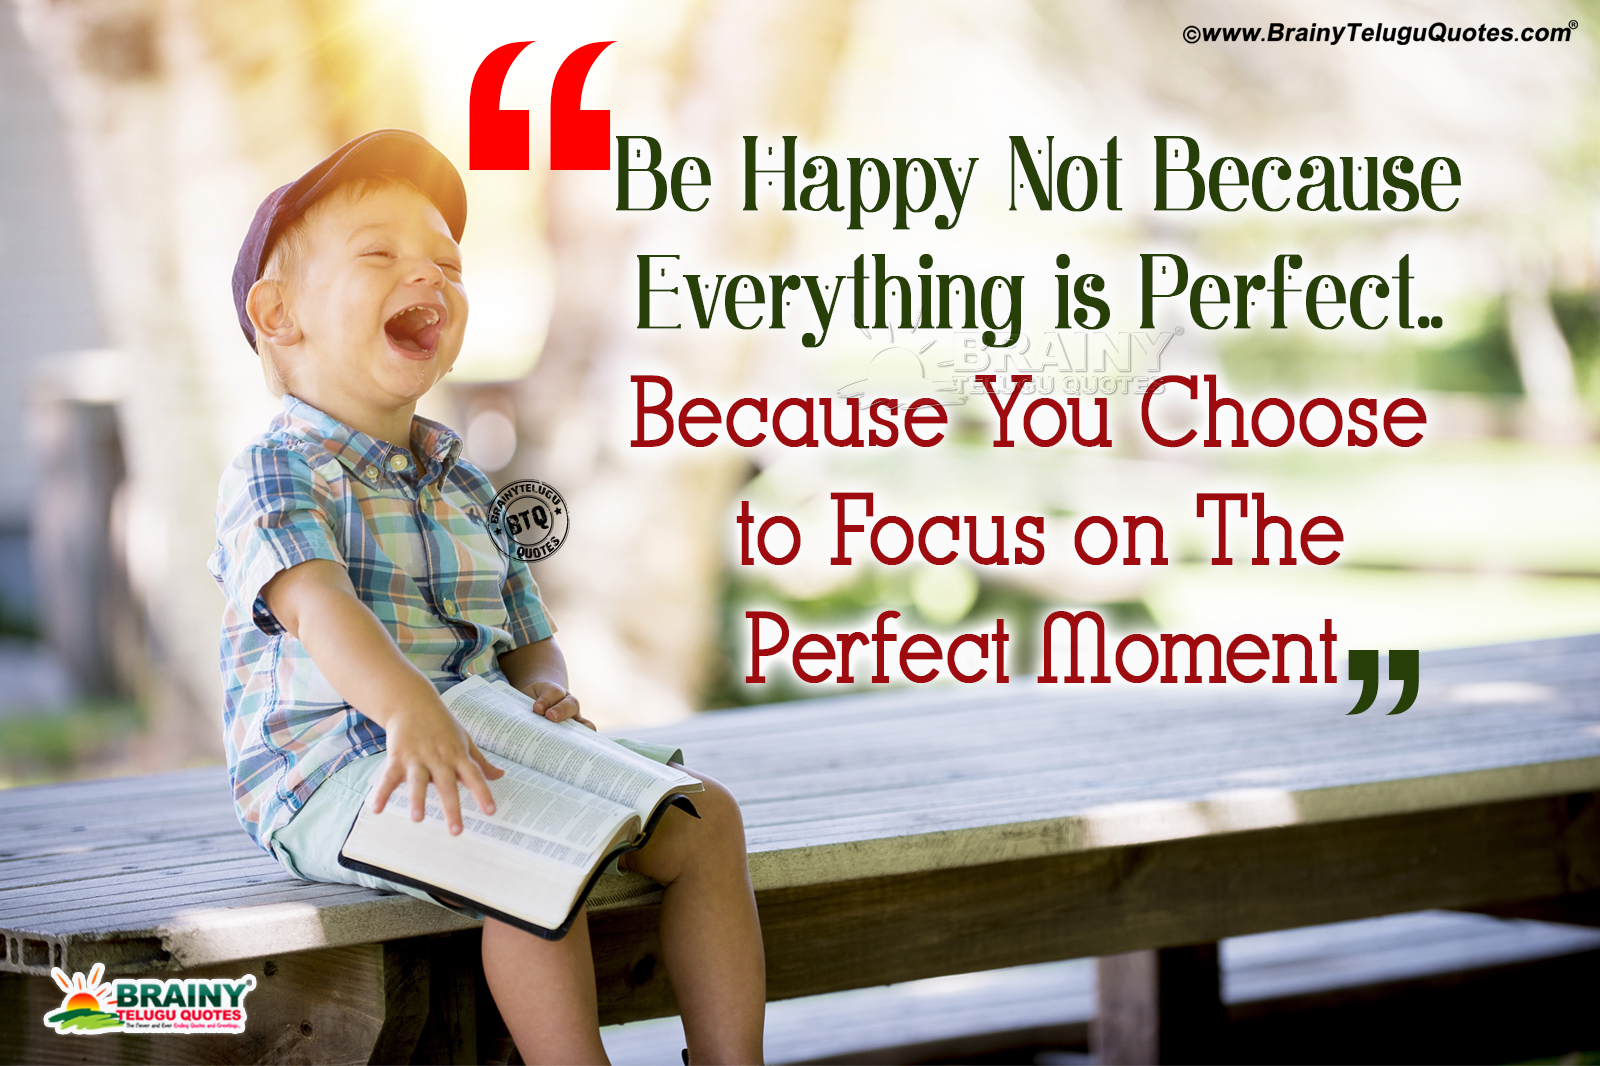 Happiness Quotes That Will Make You Smile (Instantly) with cute boy HD image. BrainyTeluguQuotes.comTelugu quotes. English quotes. Hindi quotes. Tamil quotes. Greetings